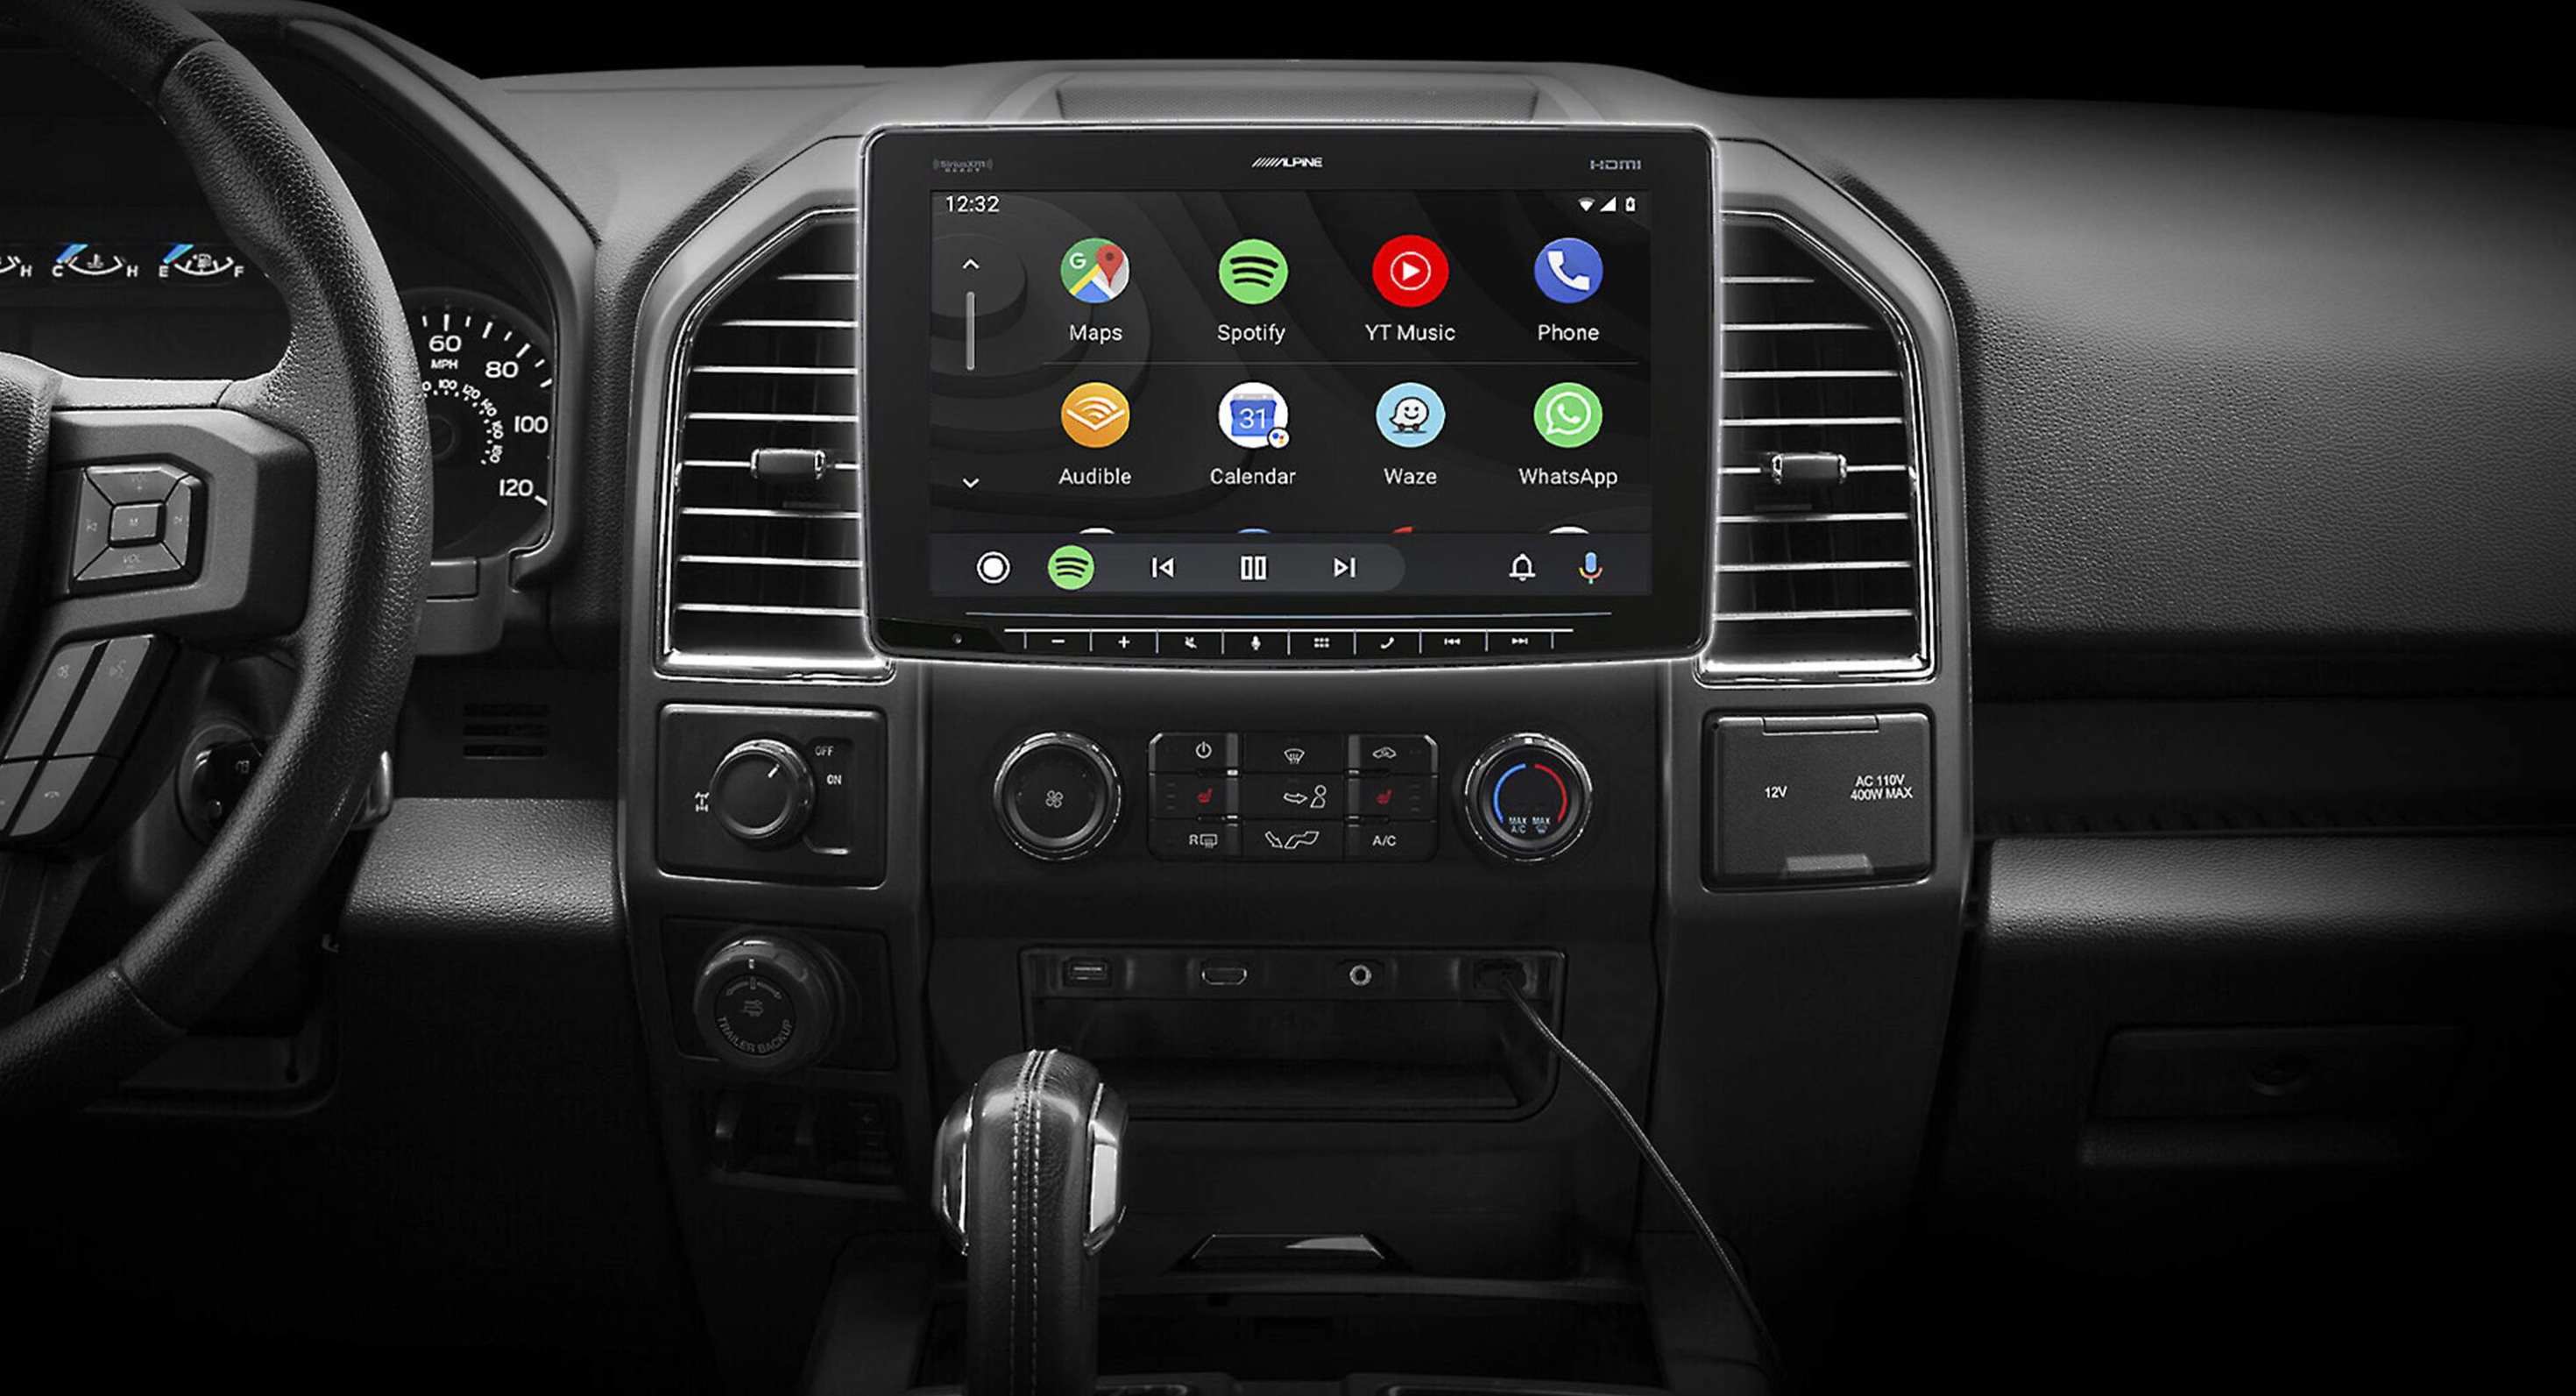 Android Auto - Apps on Google Play